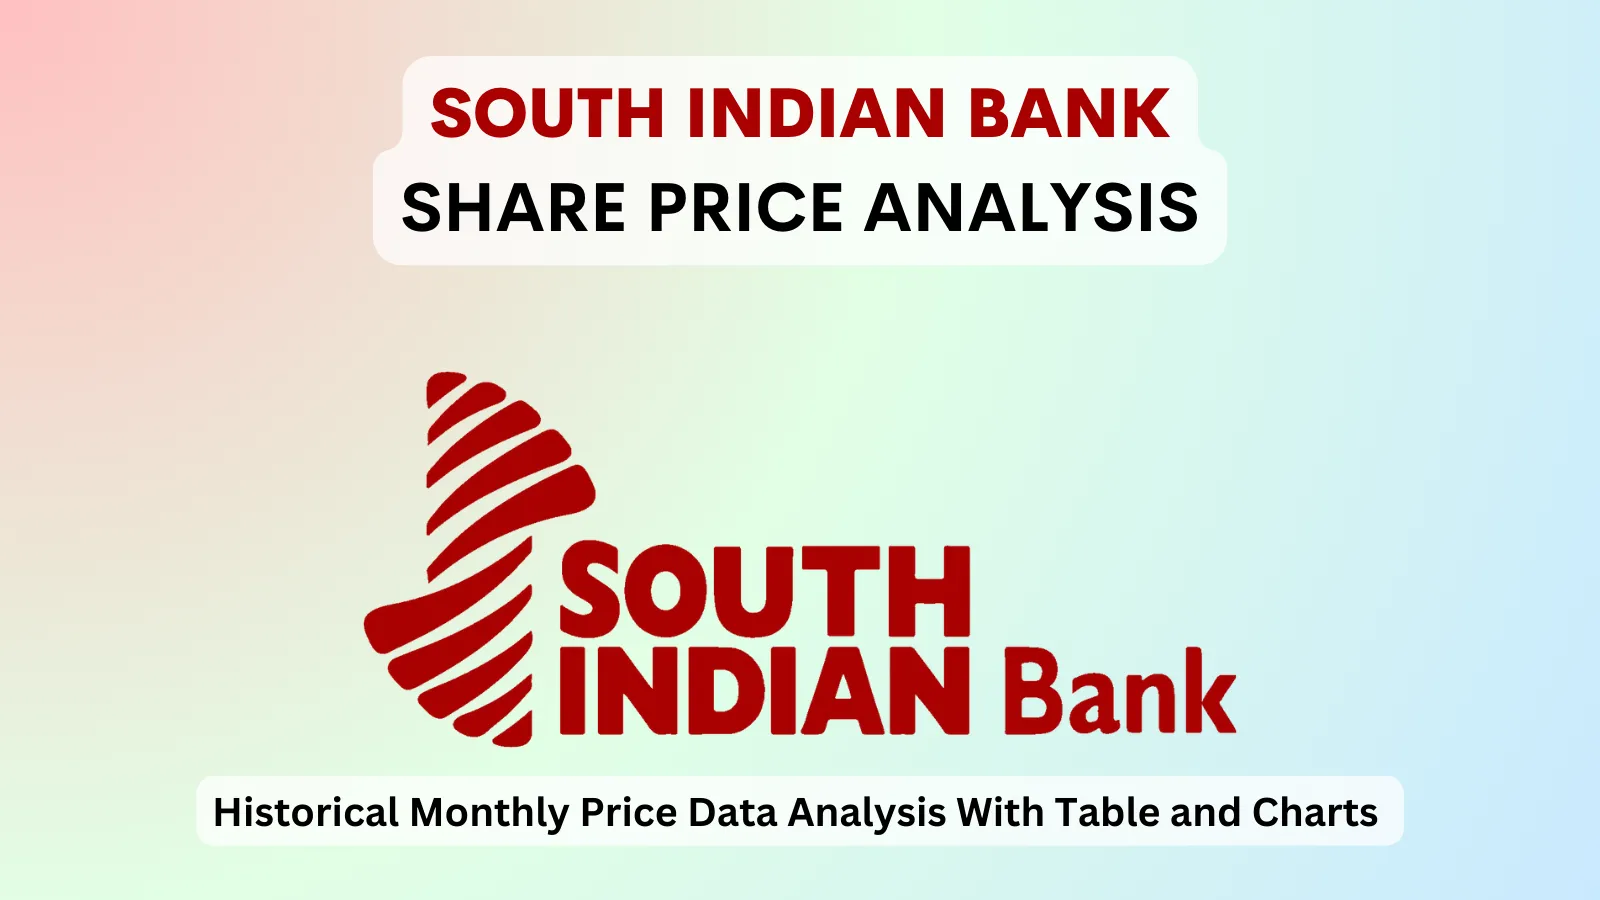 South Indian Bank share price analysis